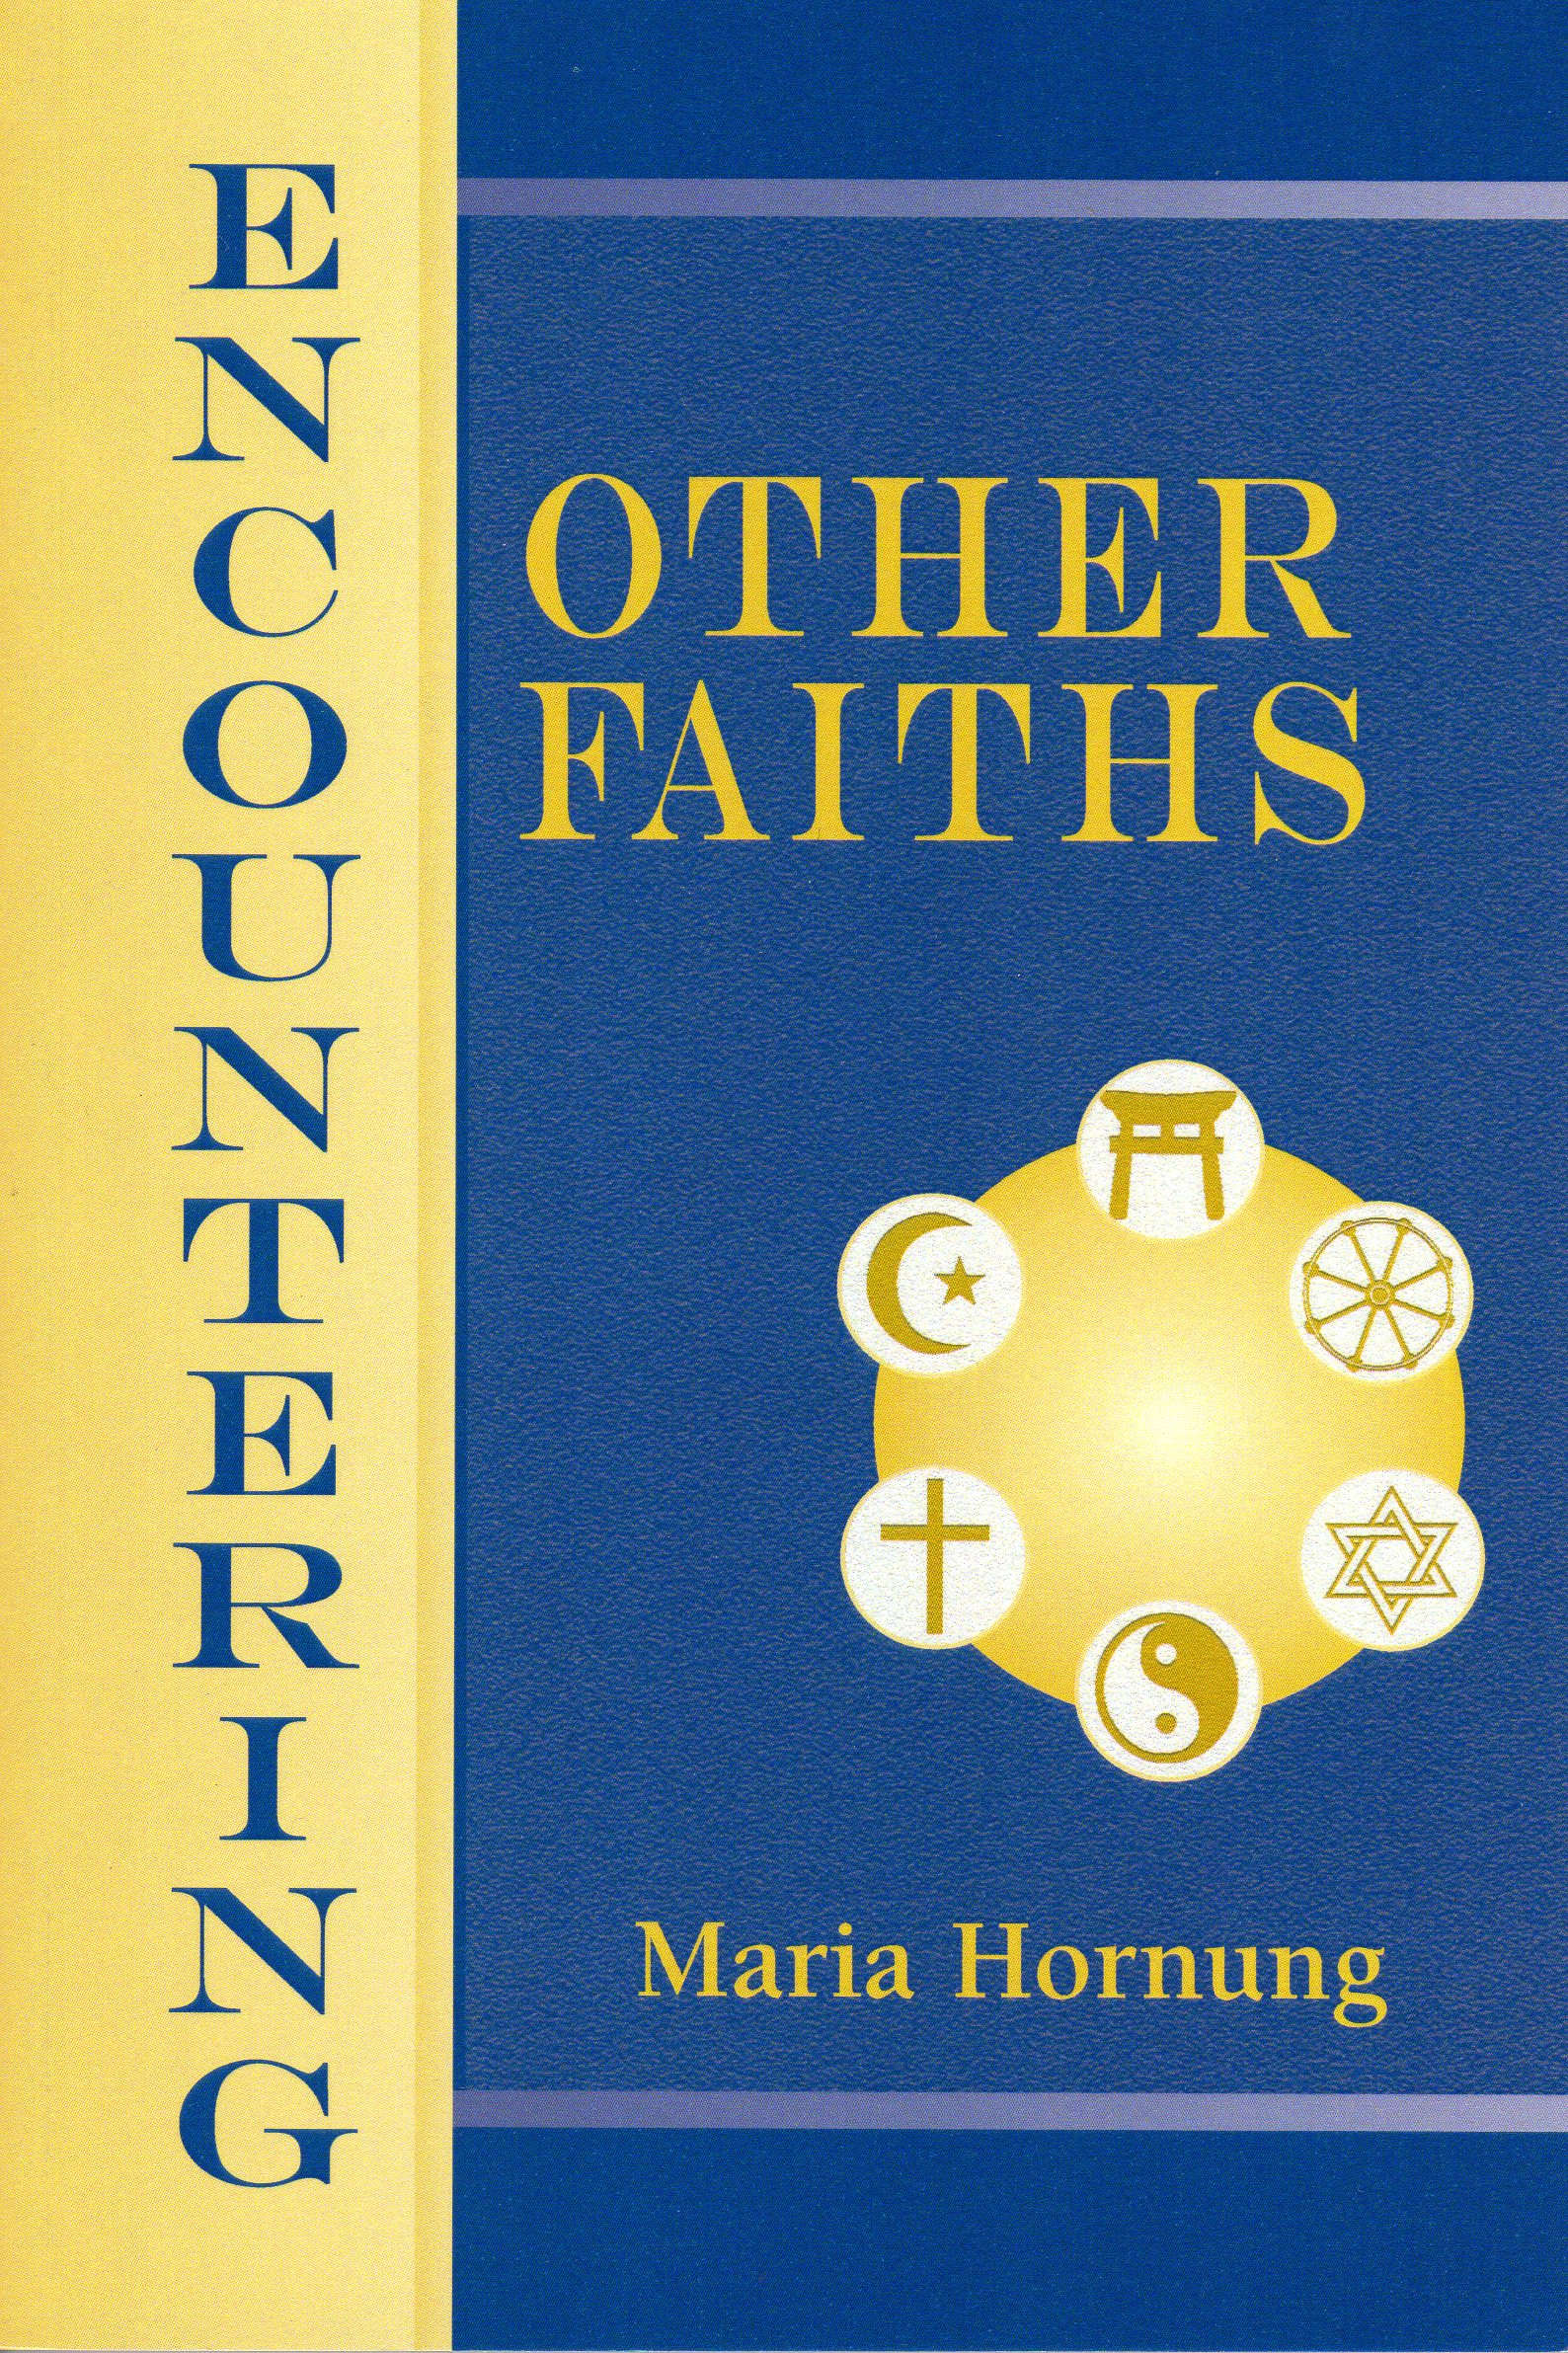 Encountering Other Faiths by Sister Maria Hornung